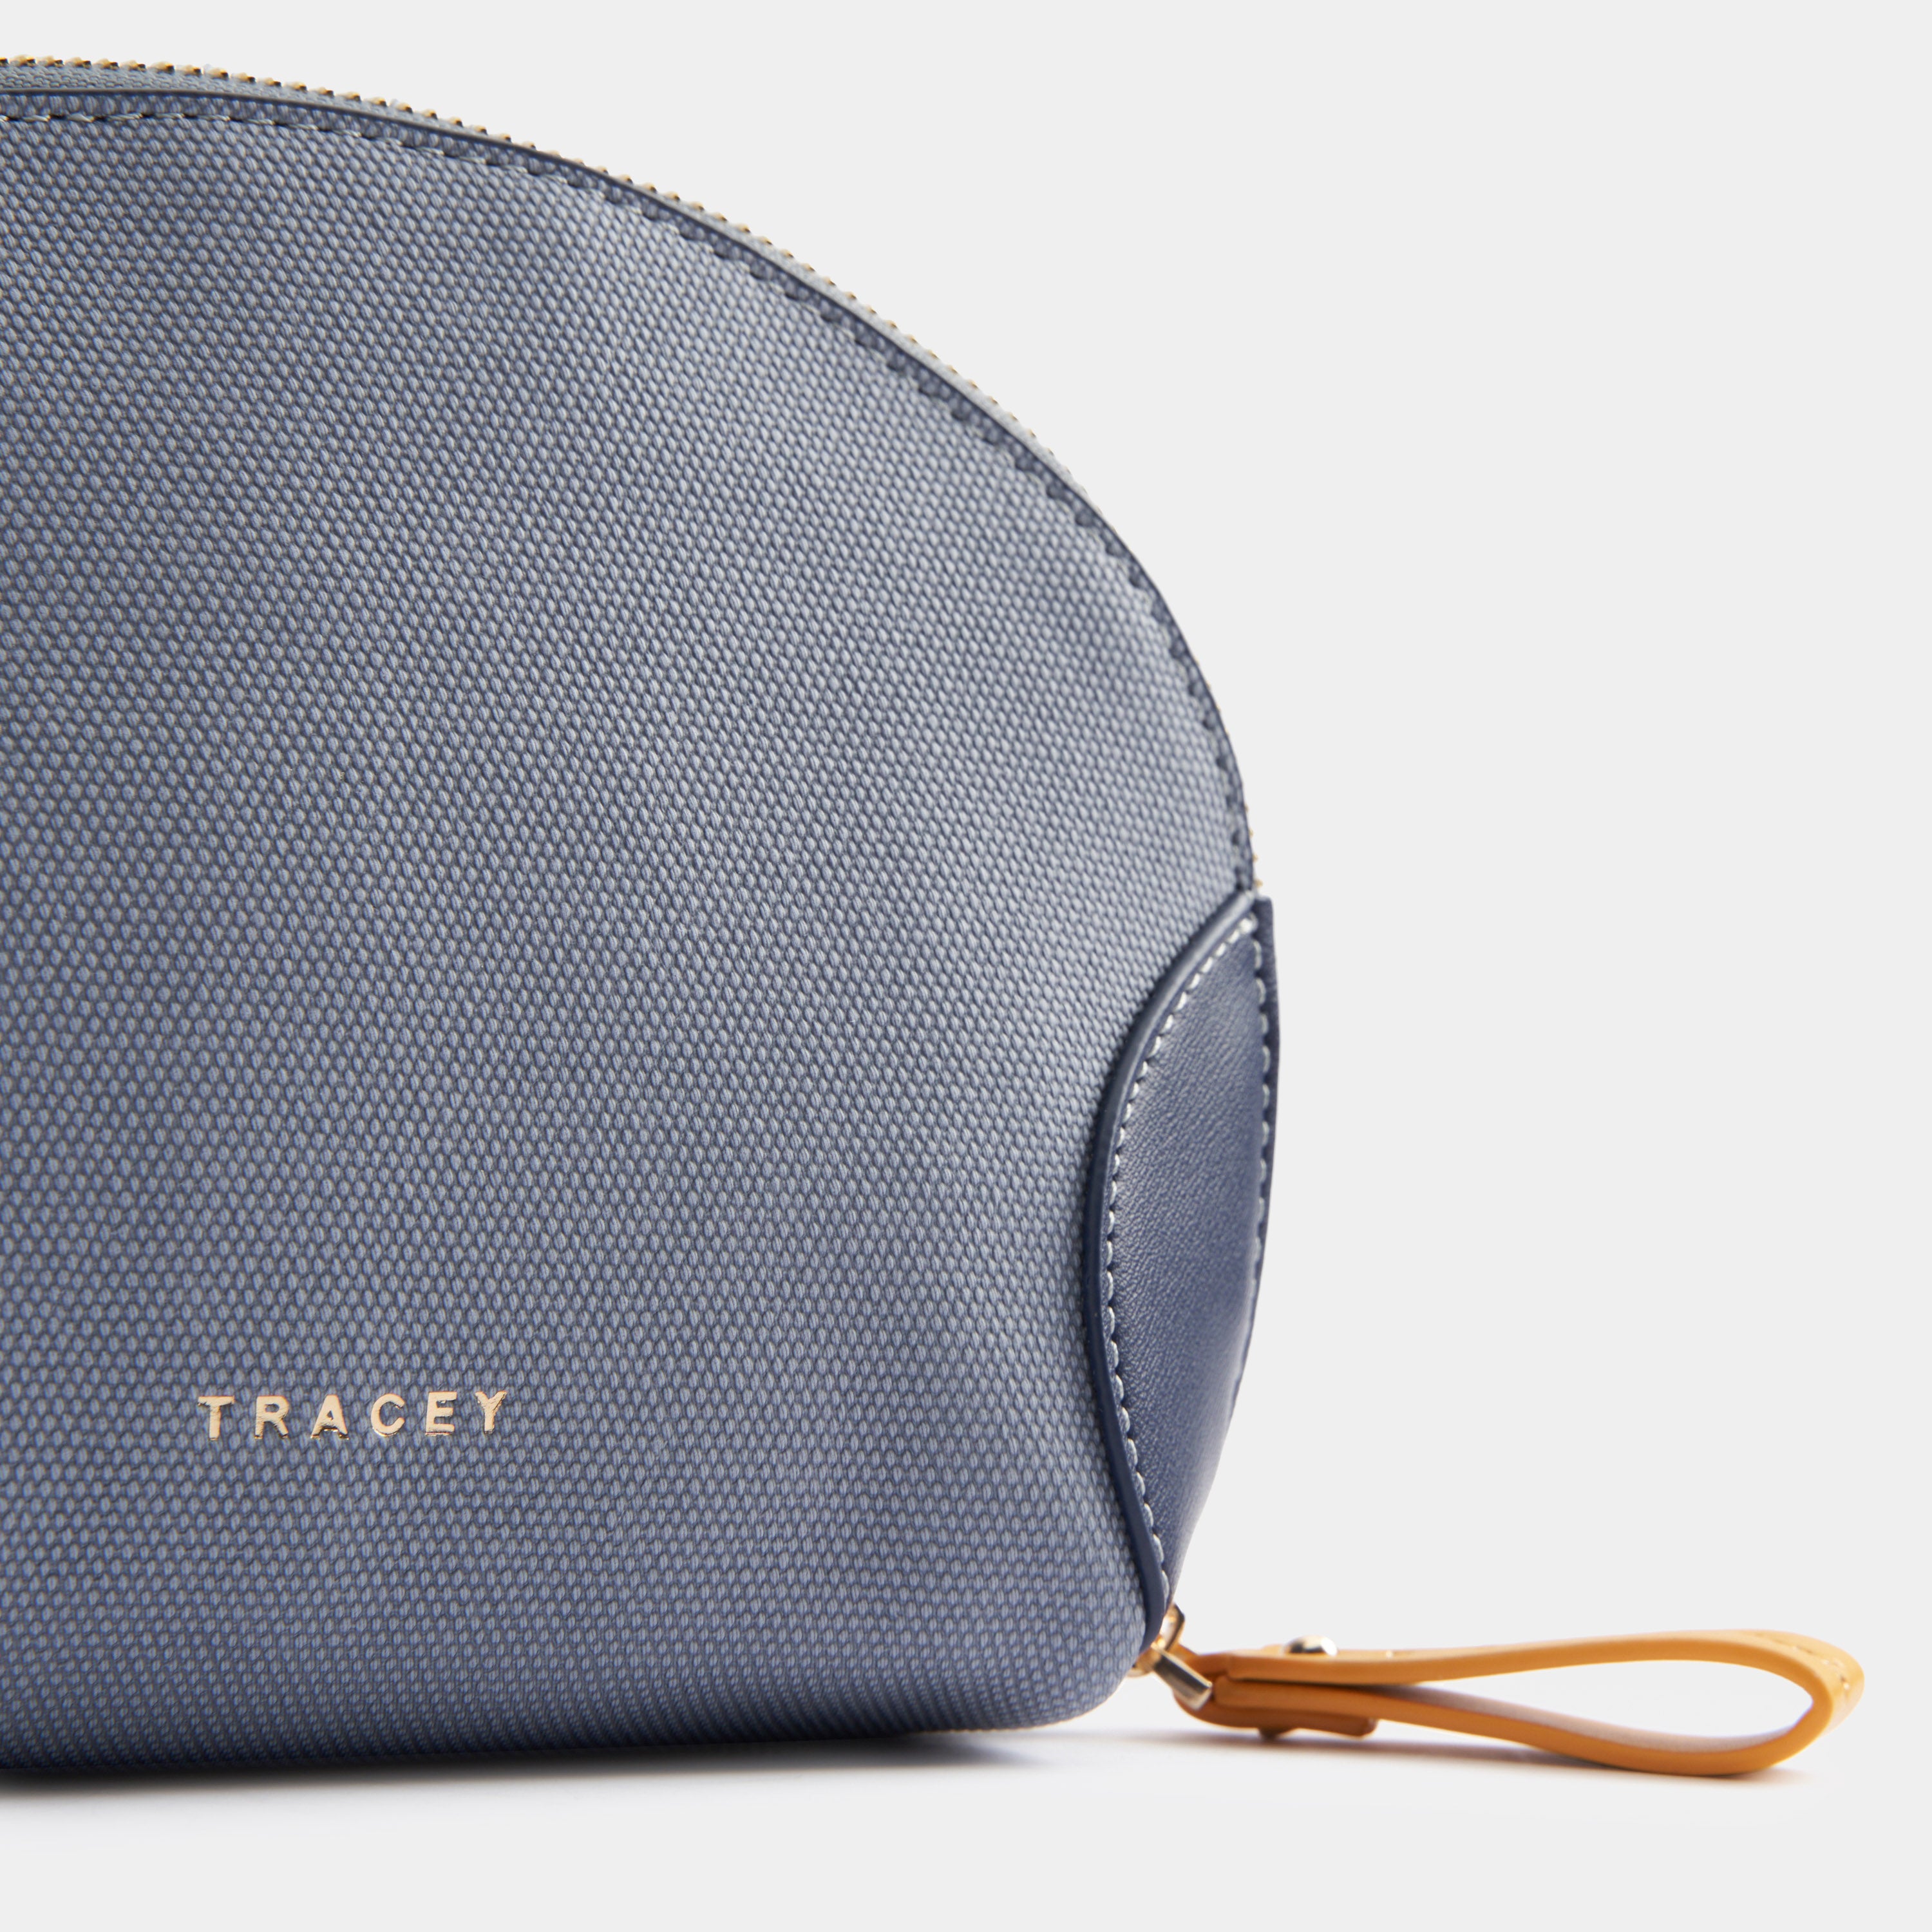 Tracey x Save The Tapir Pouch Bag